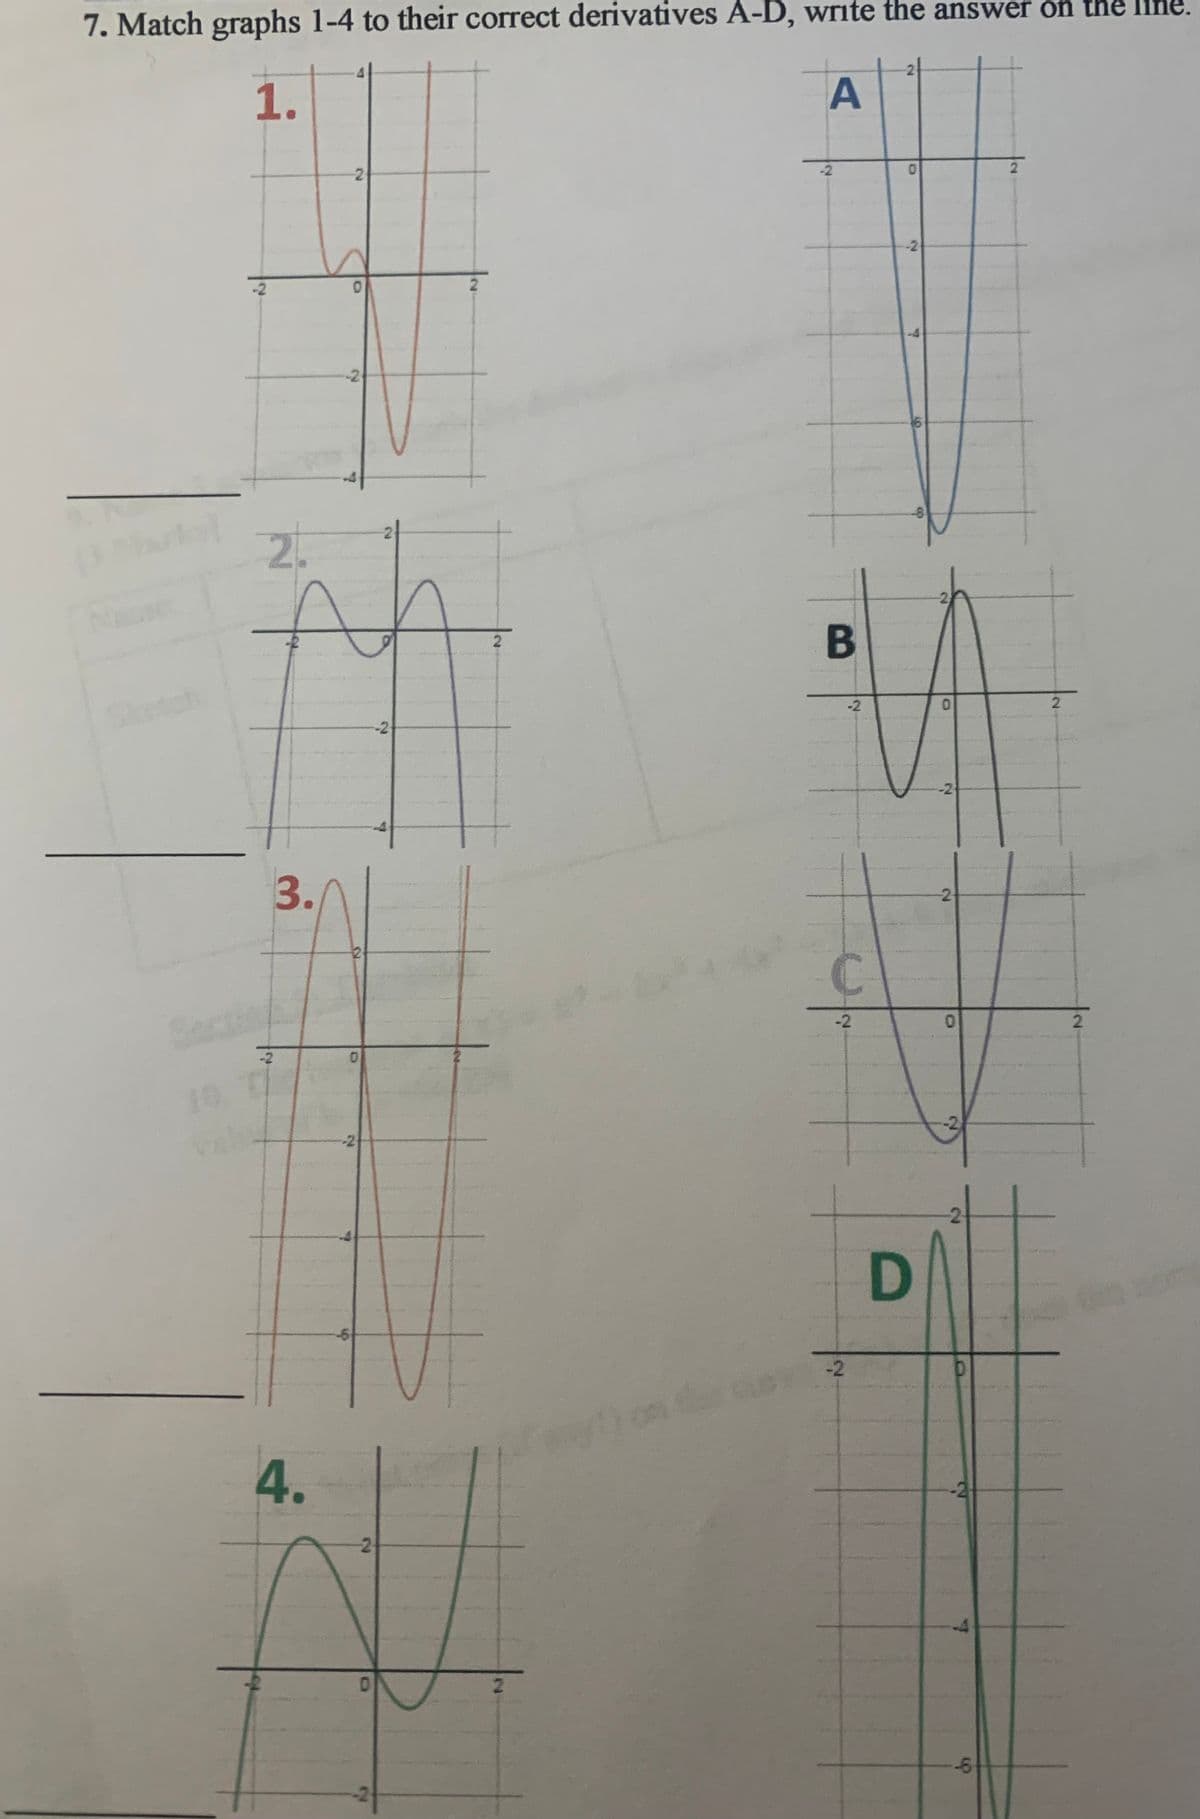 7. Match graphs 1-4 to their correct derivatives A-D, write the answer on the line.
1.
A
Sketch
-2
-2
2
-2
2
A
2
3.
-2
-2
B
D
2
8
-2
0
2
2
C
-2
0
2
6
-2
4.
2
2
D
-2
2
0
-2
D
-2
6
2